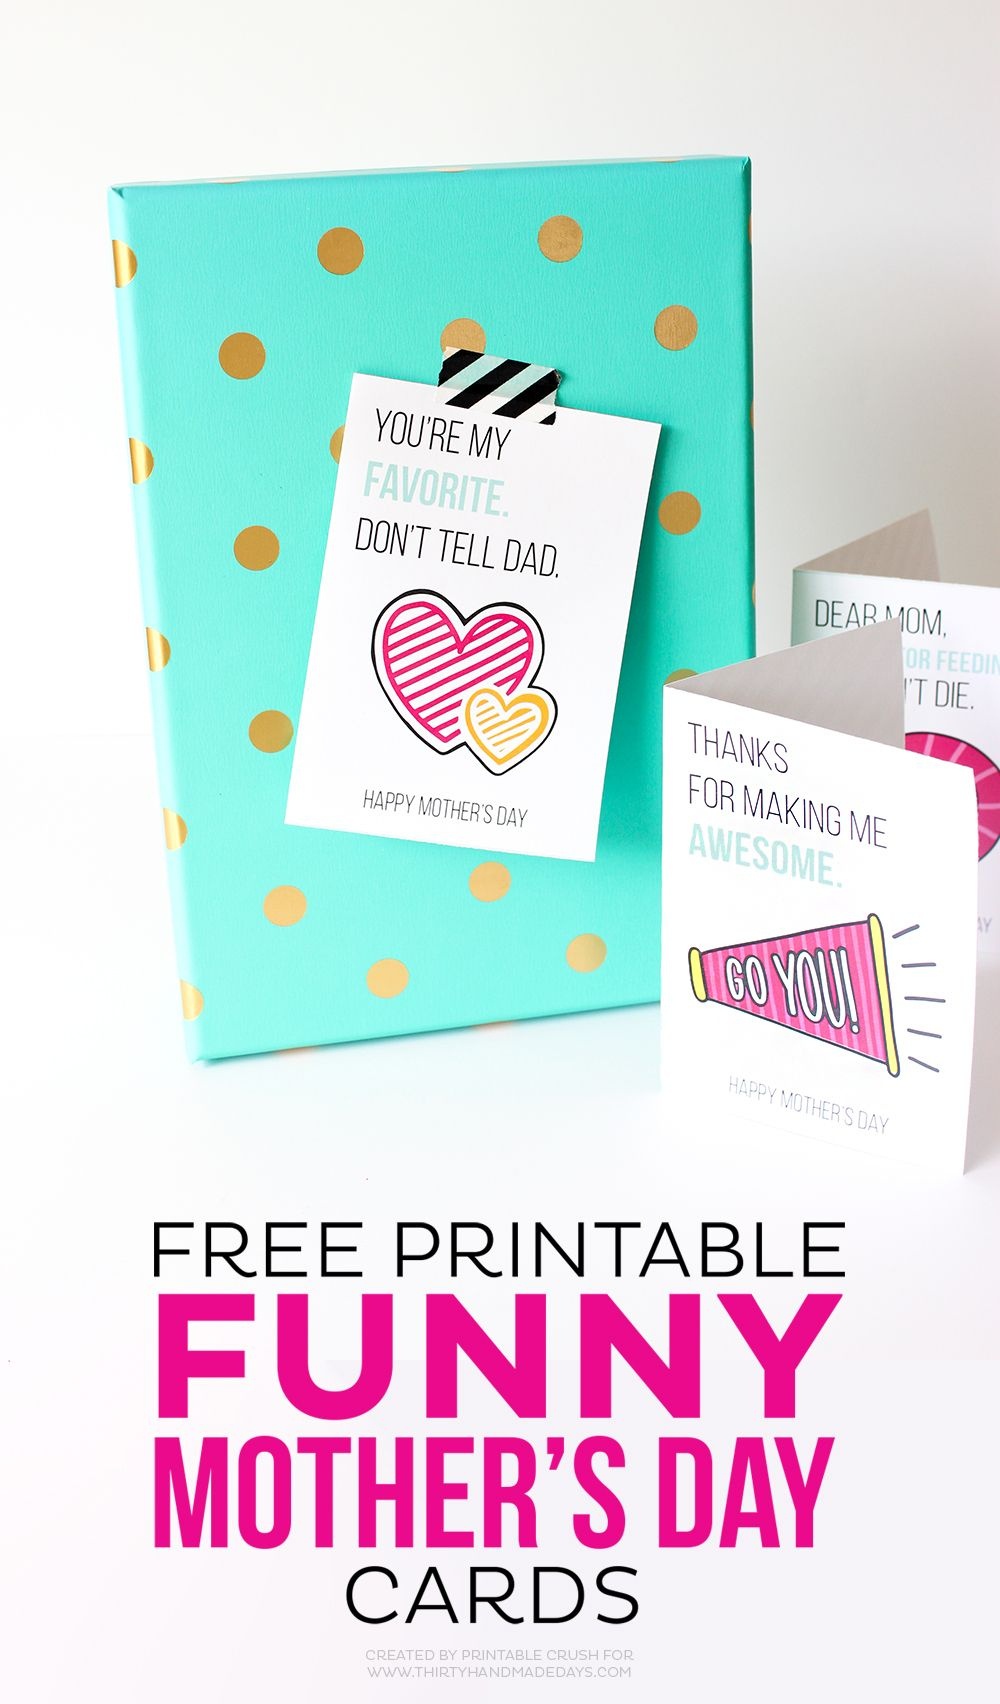 Printable Funny Mother&amp;#039;s Day Cards | Art + Graphic Design Bloggers - Free Funny Printable Cards